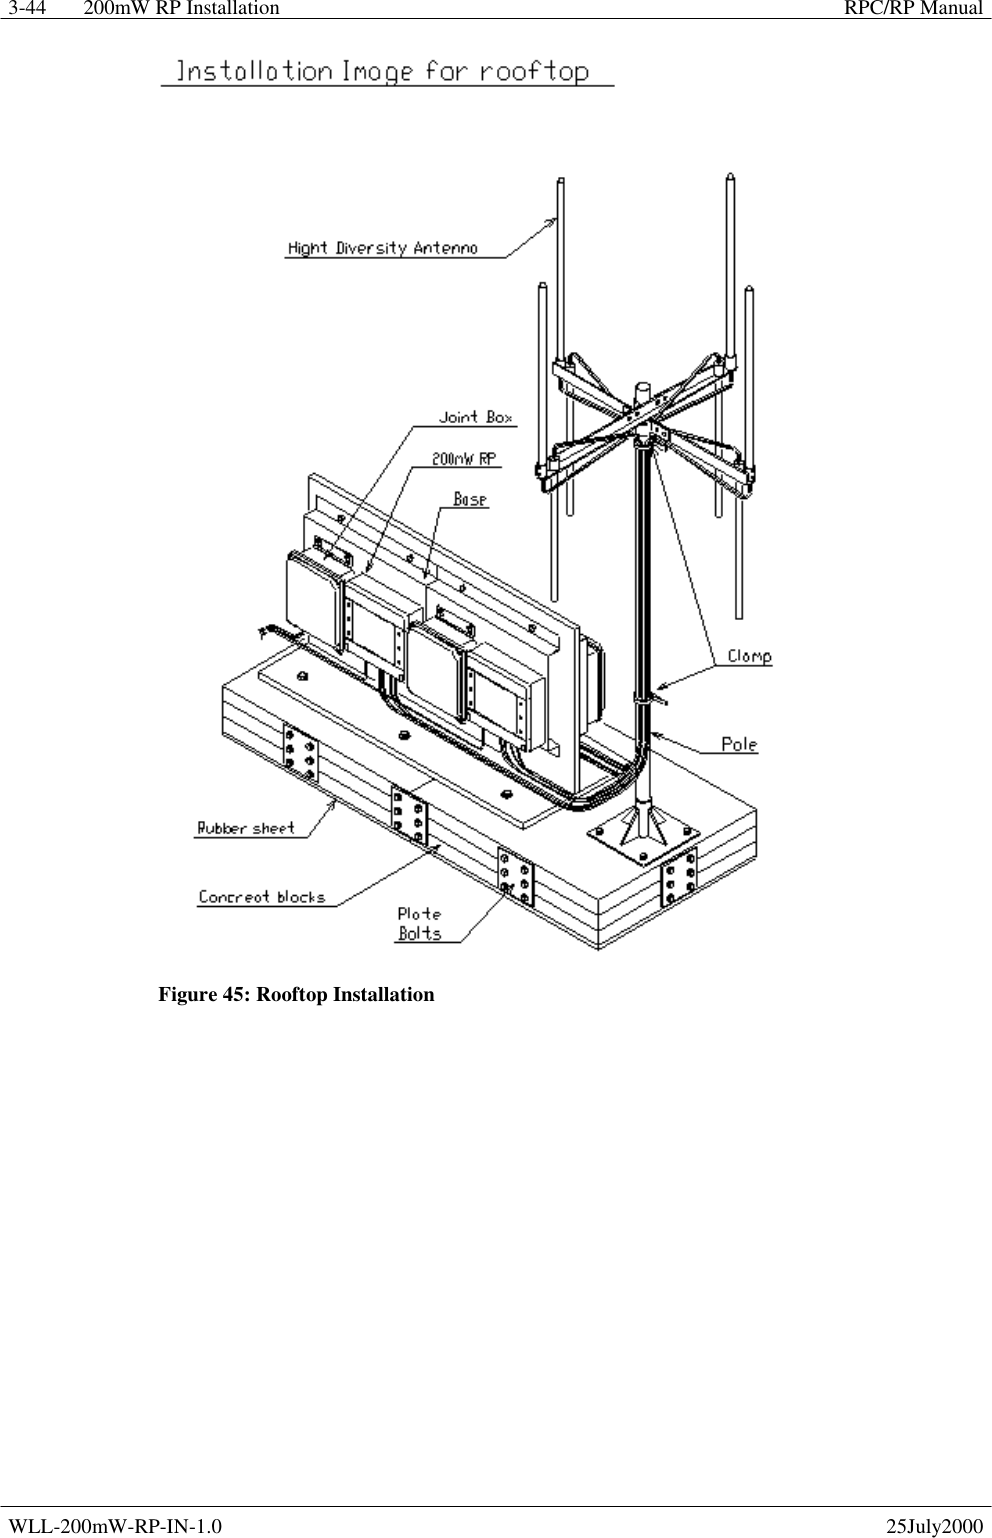 200mW RP Installation    RPC/RP Manual WLL-200mW-RP-IN-1.0   25July2000 3-44  Figure 45: Rooftop Installation         